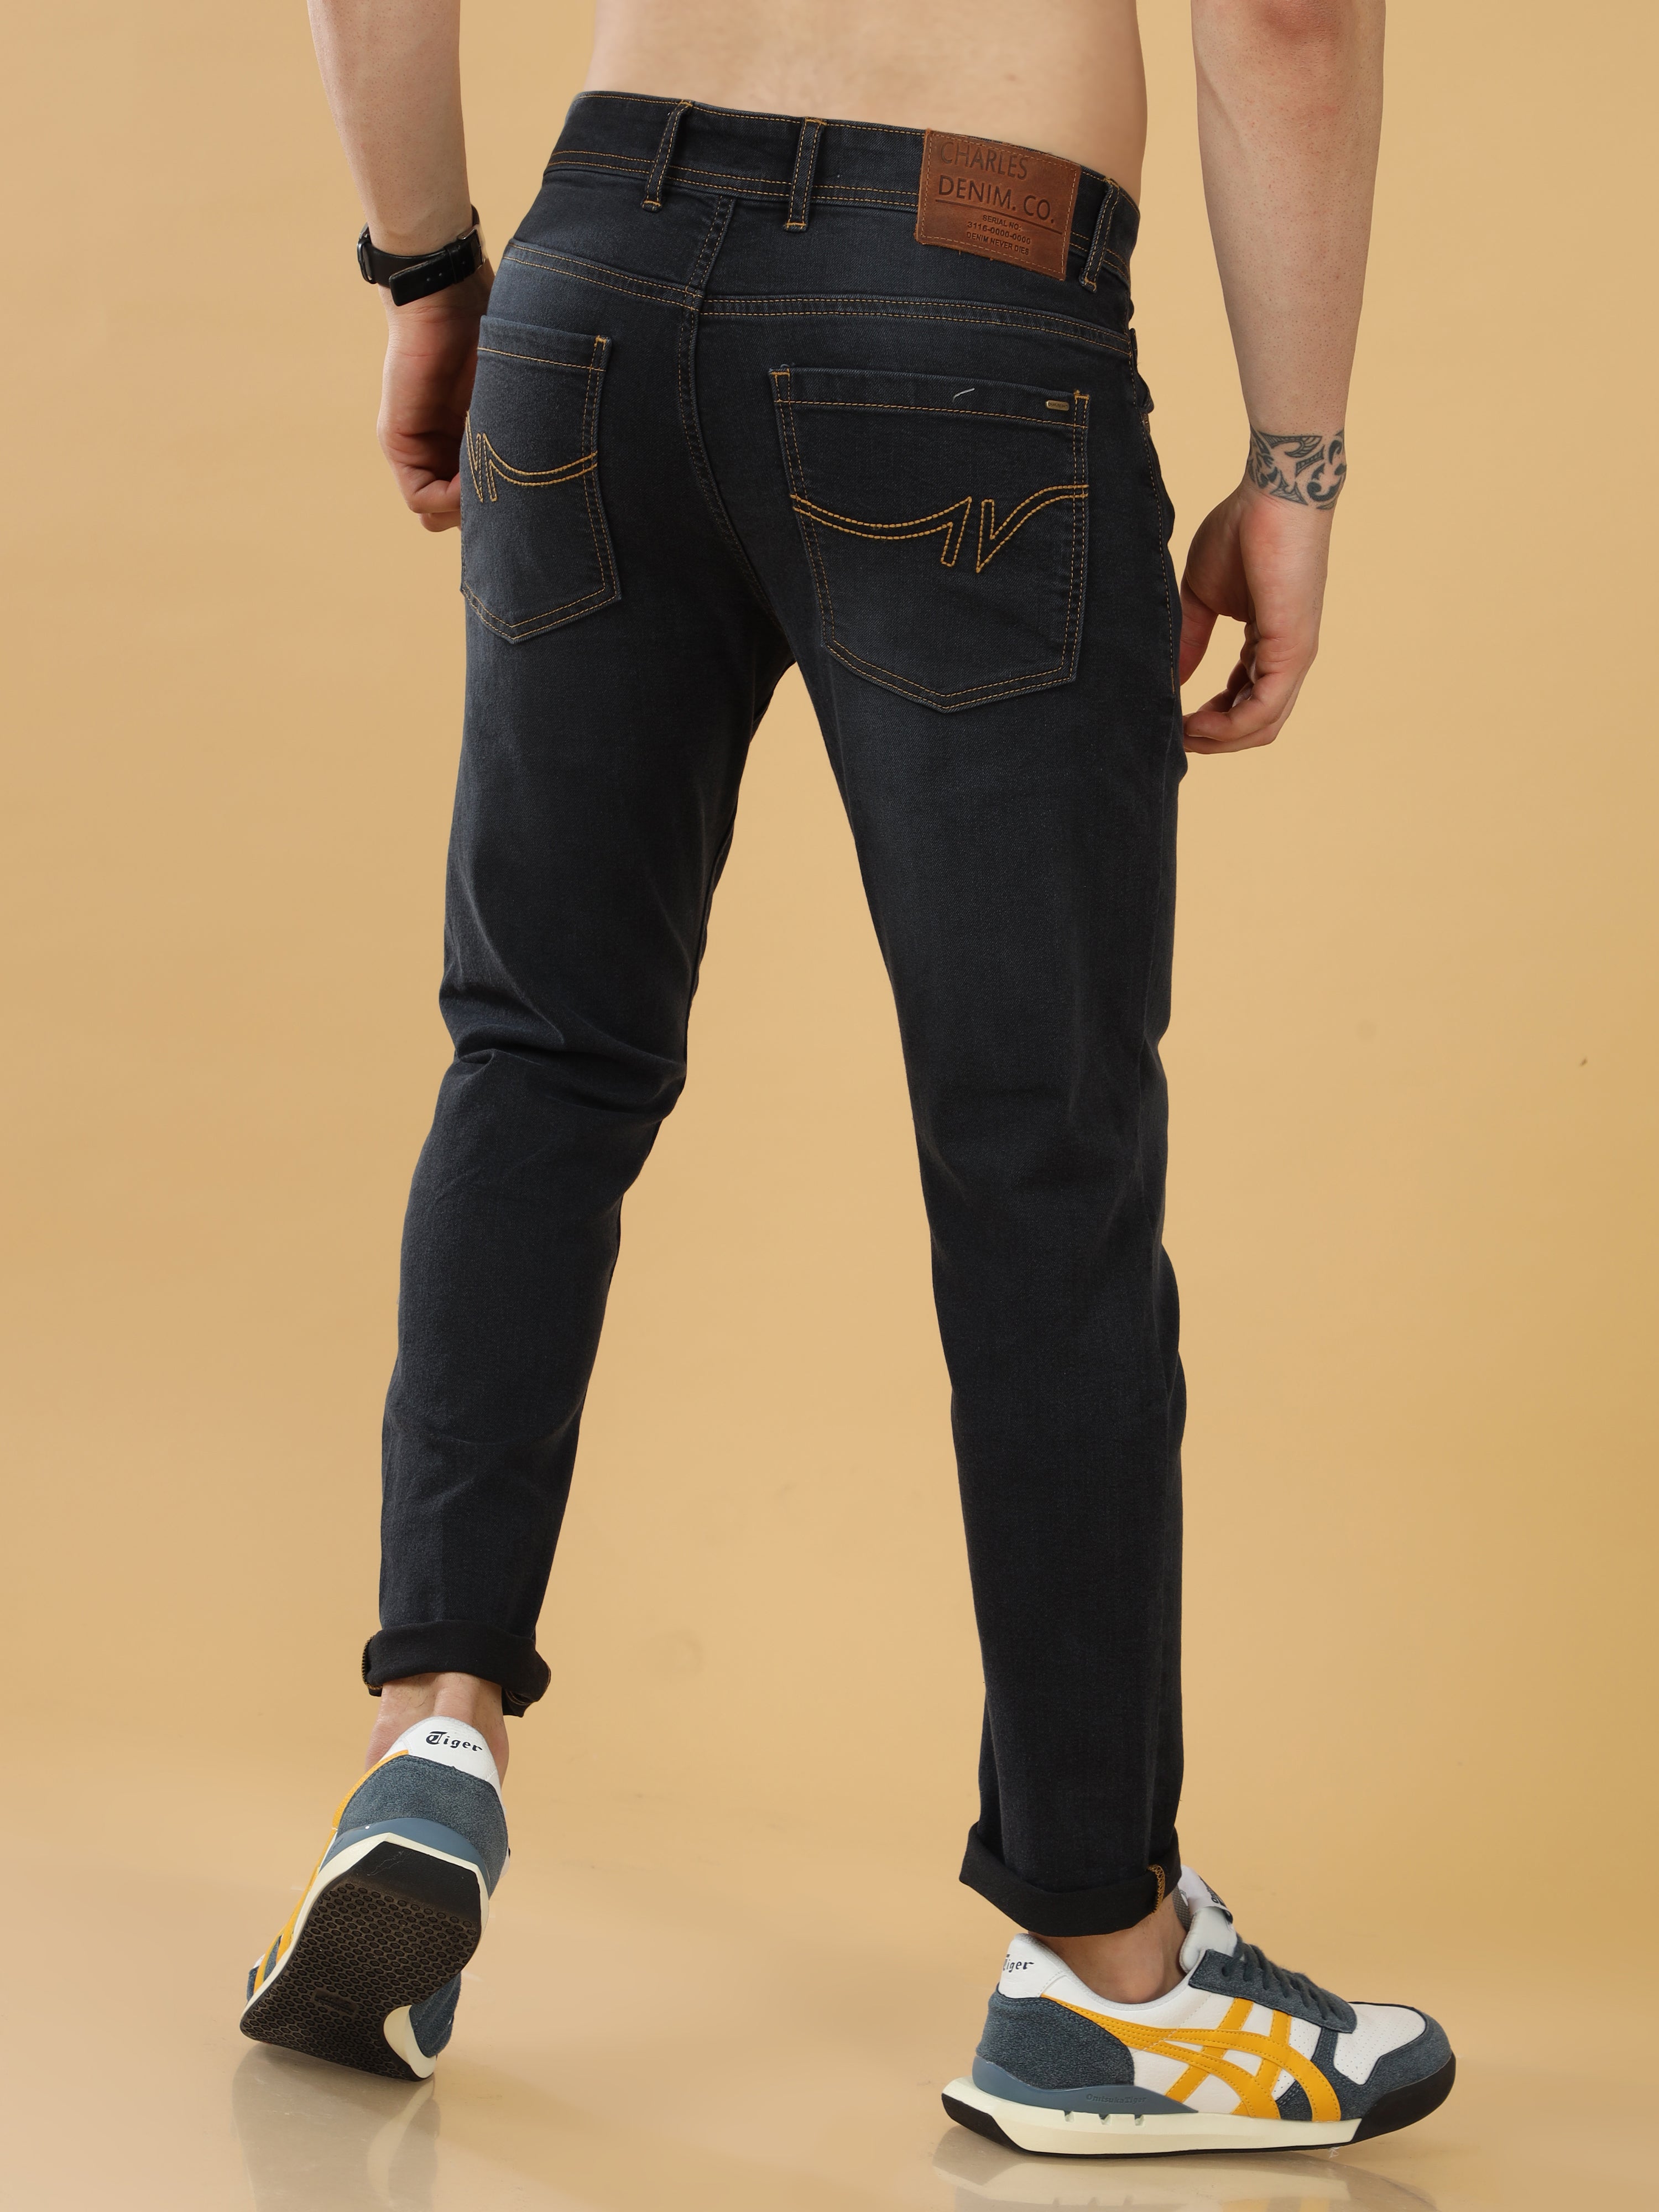 Details more than 158 denim and co jeans